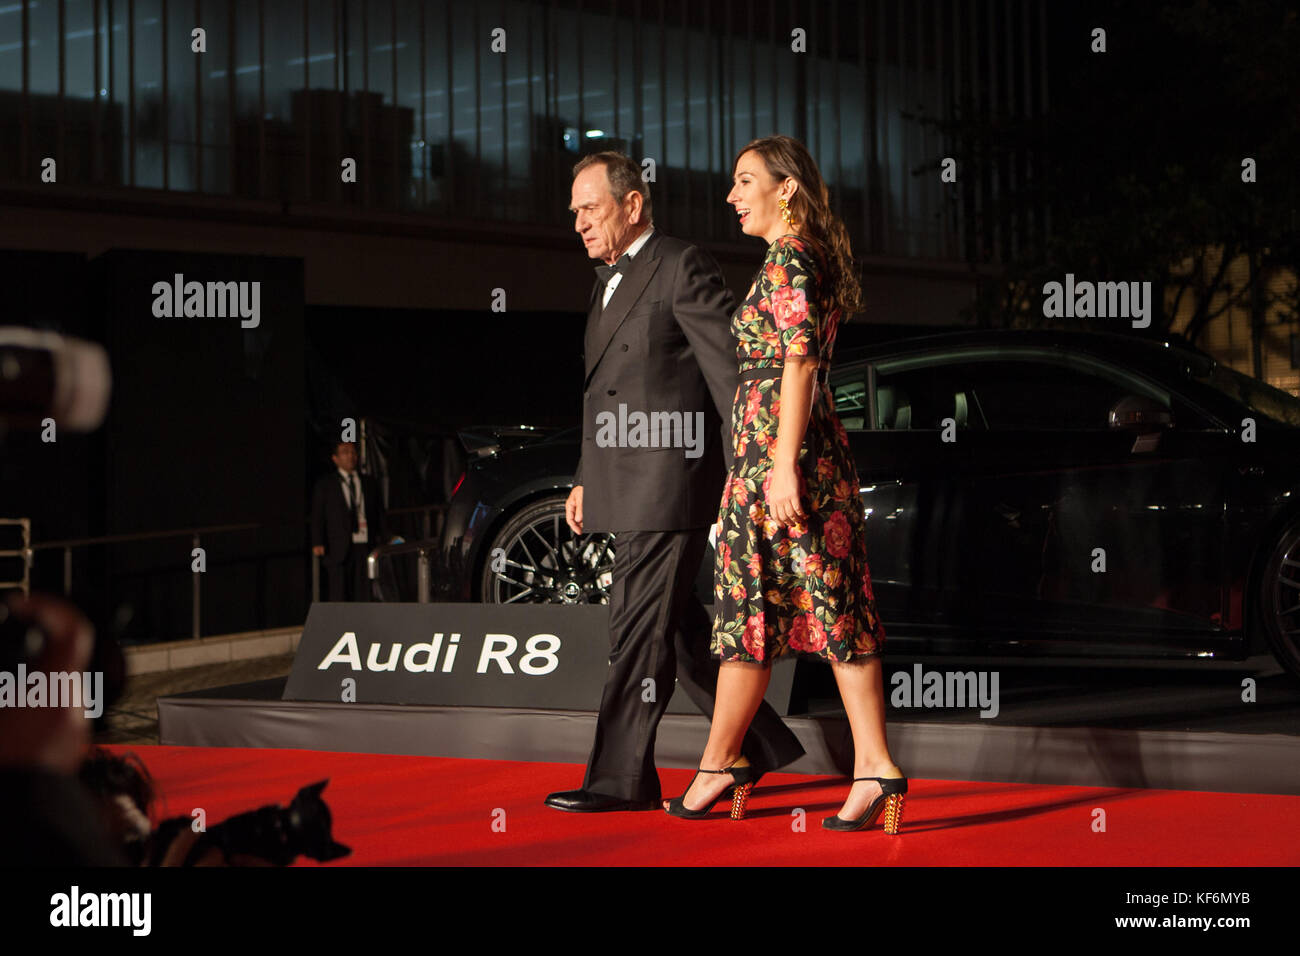 Members of the International Competition Jury, Victoria Jones, Tommy Lee Jones, appears on the opening red carpet for The 30th Tokyo International Film Festival in Roppongi on October 25th, 2017, in Tokyo, Japan. The festival runs from October 25th to November 3rd at venues in Tokyo. Credit: Michael Steinebach/AFLO/Alamy Live News Stock Photo